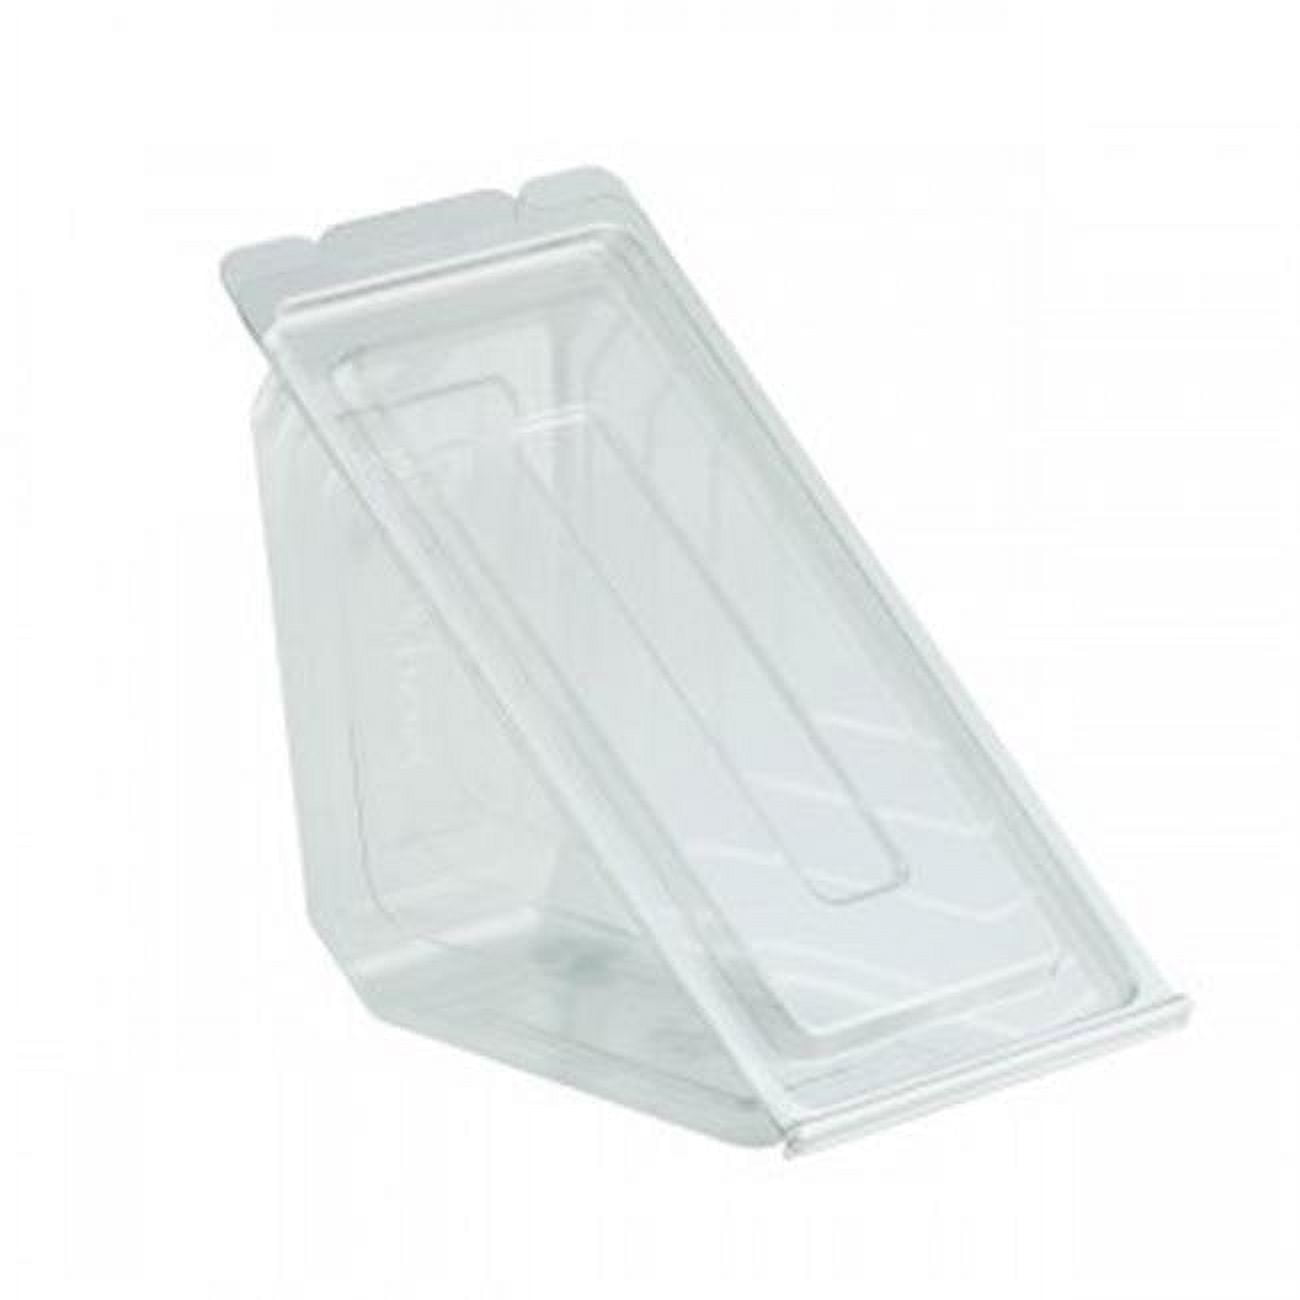 4511019 Hinged Sandwich Wedge Pvc Clear Lid - Case Of 250